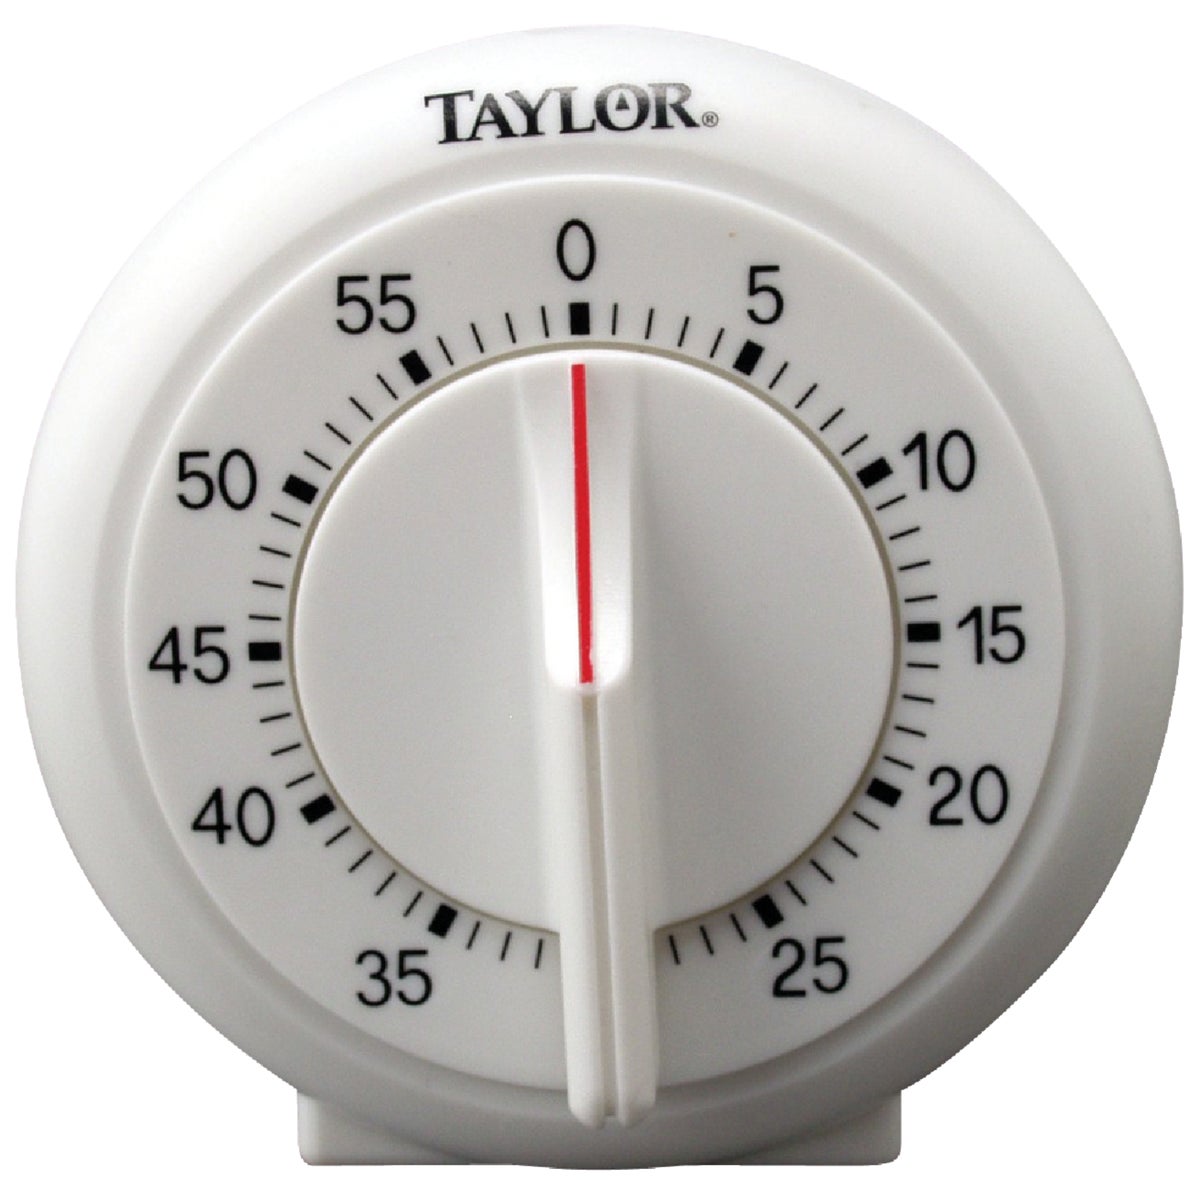 Item 601557, Long ring bell alarm. Easy-to-read dial with large numbers. 1 hour timer.